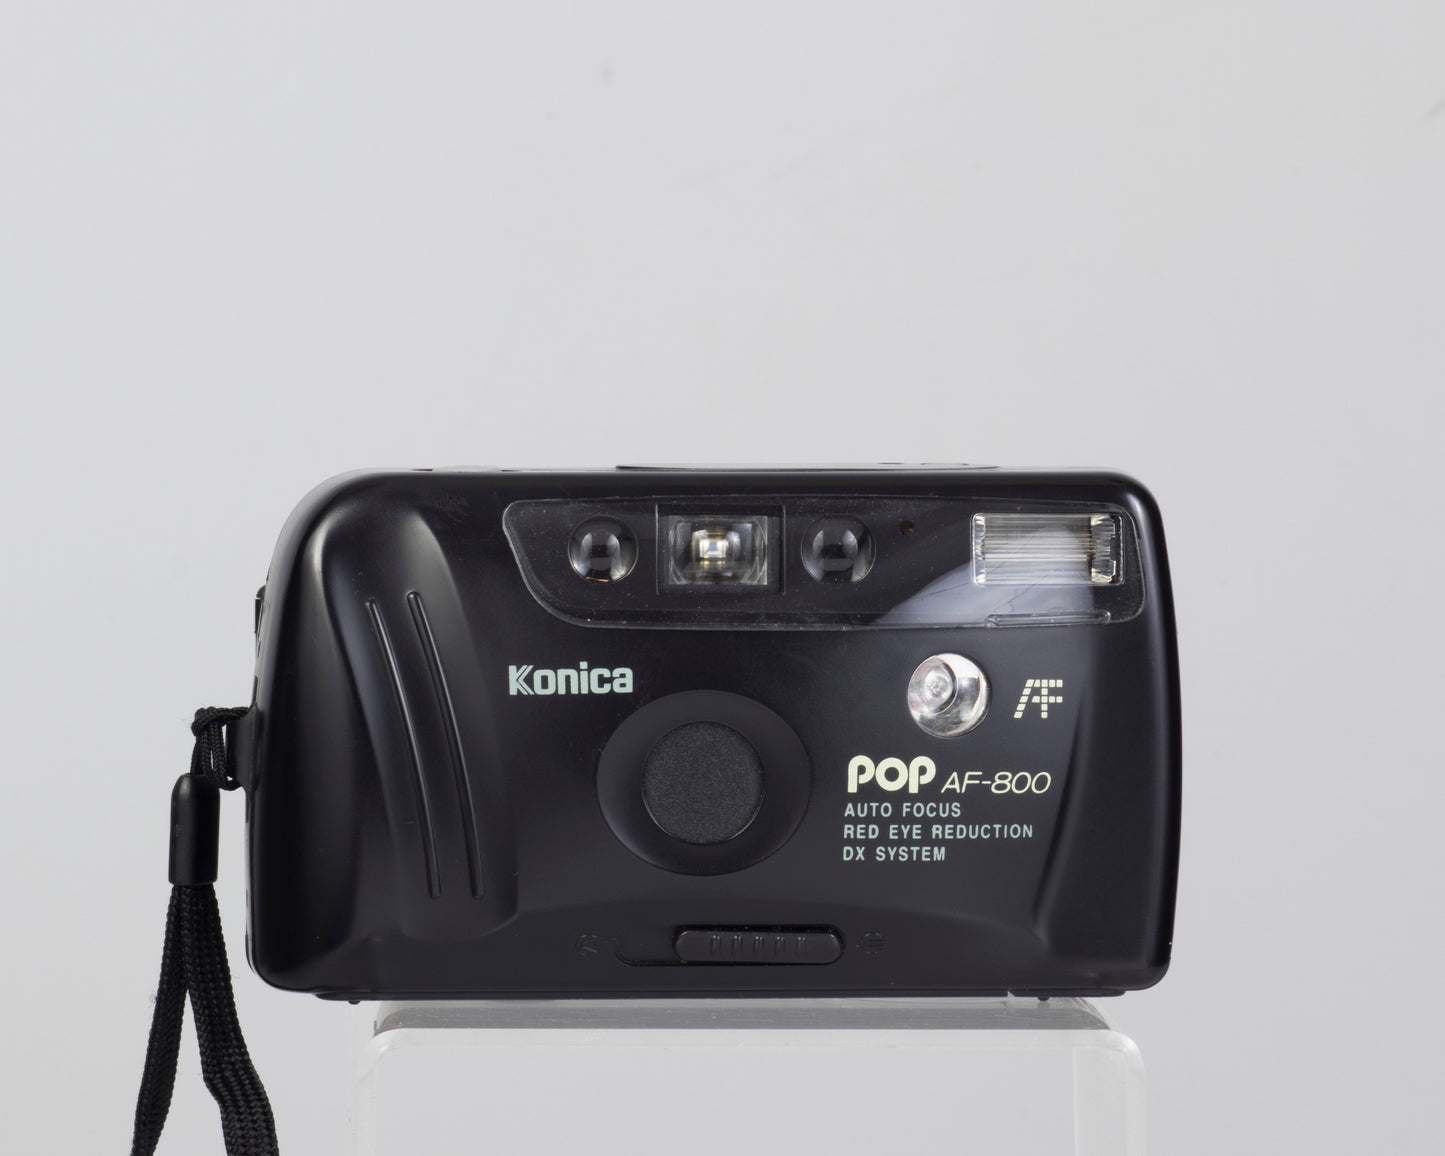 The Konica Pop AF-800 (switched off)